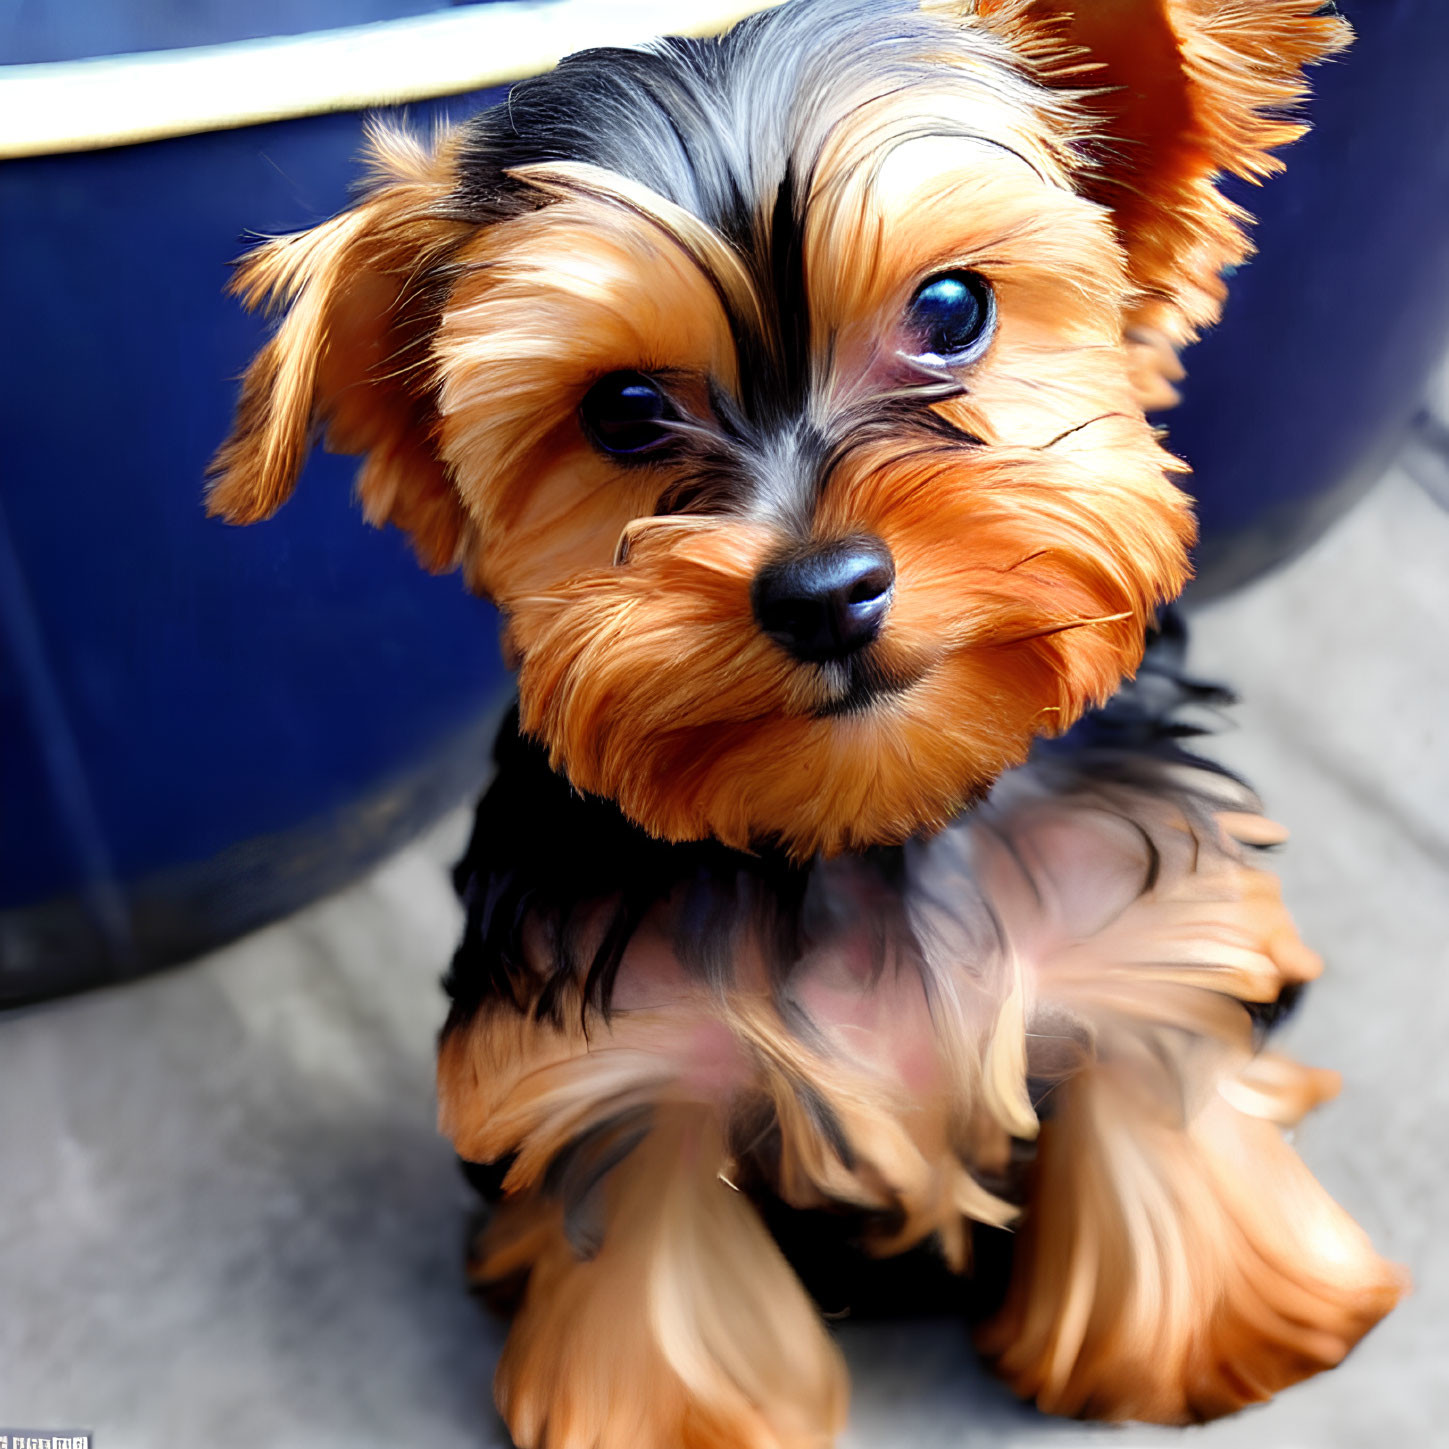 Yorkshire Terrier with glossy fur and blue eyes sitting by blue object